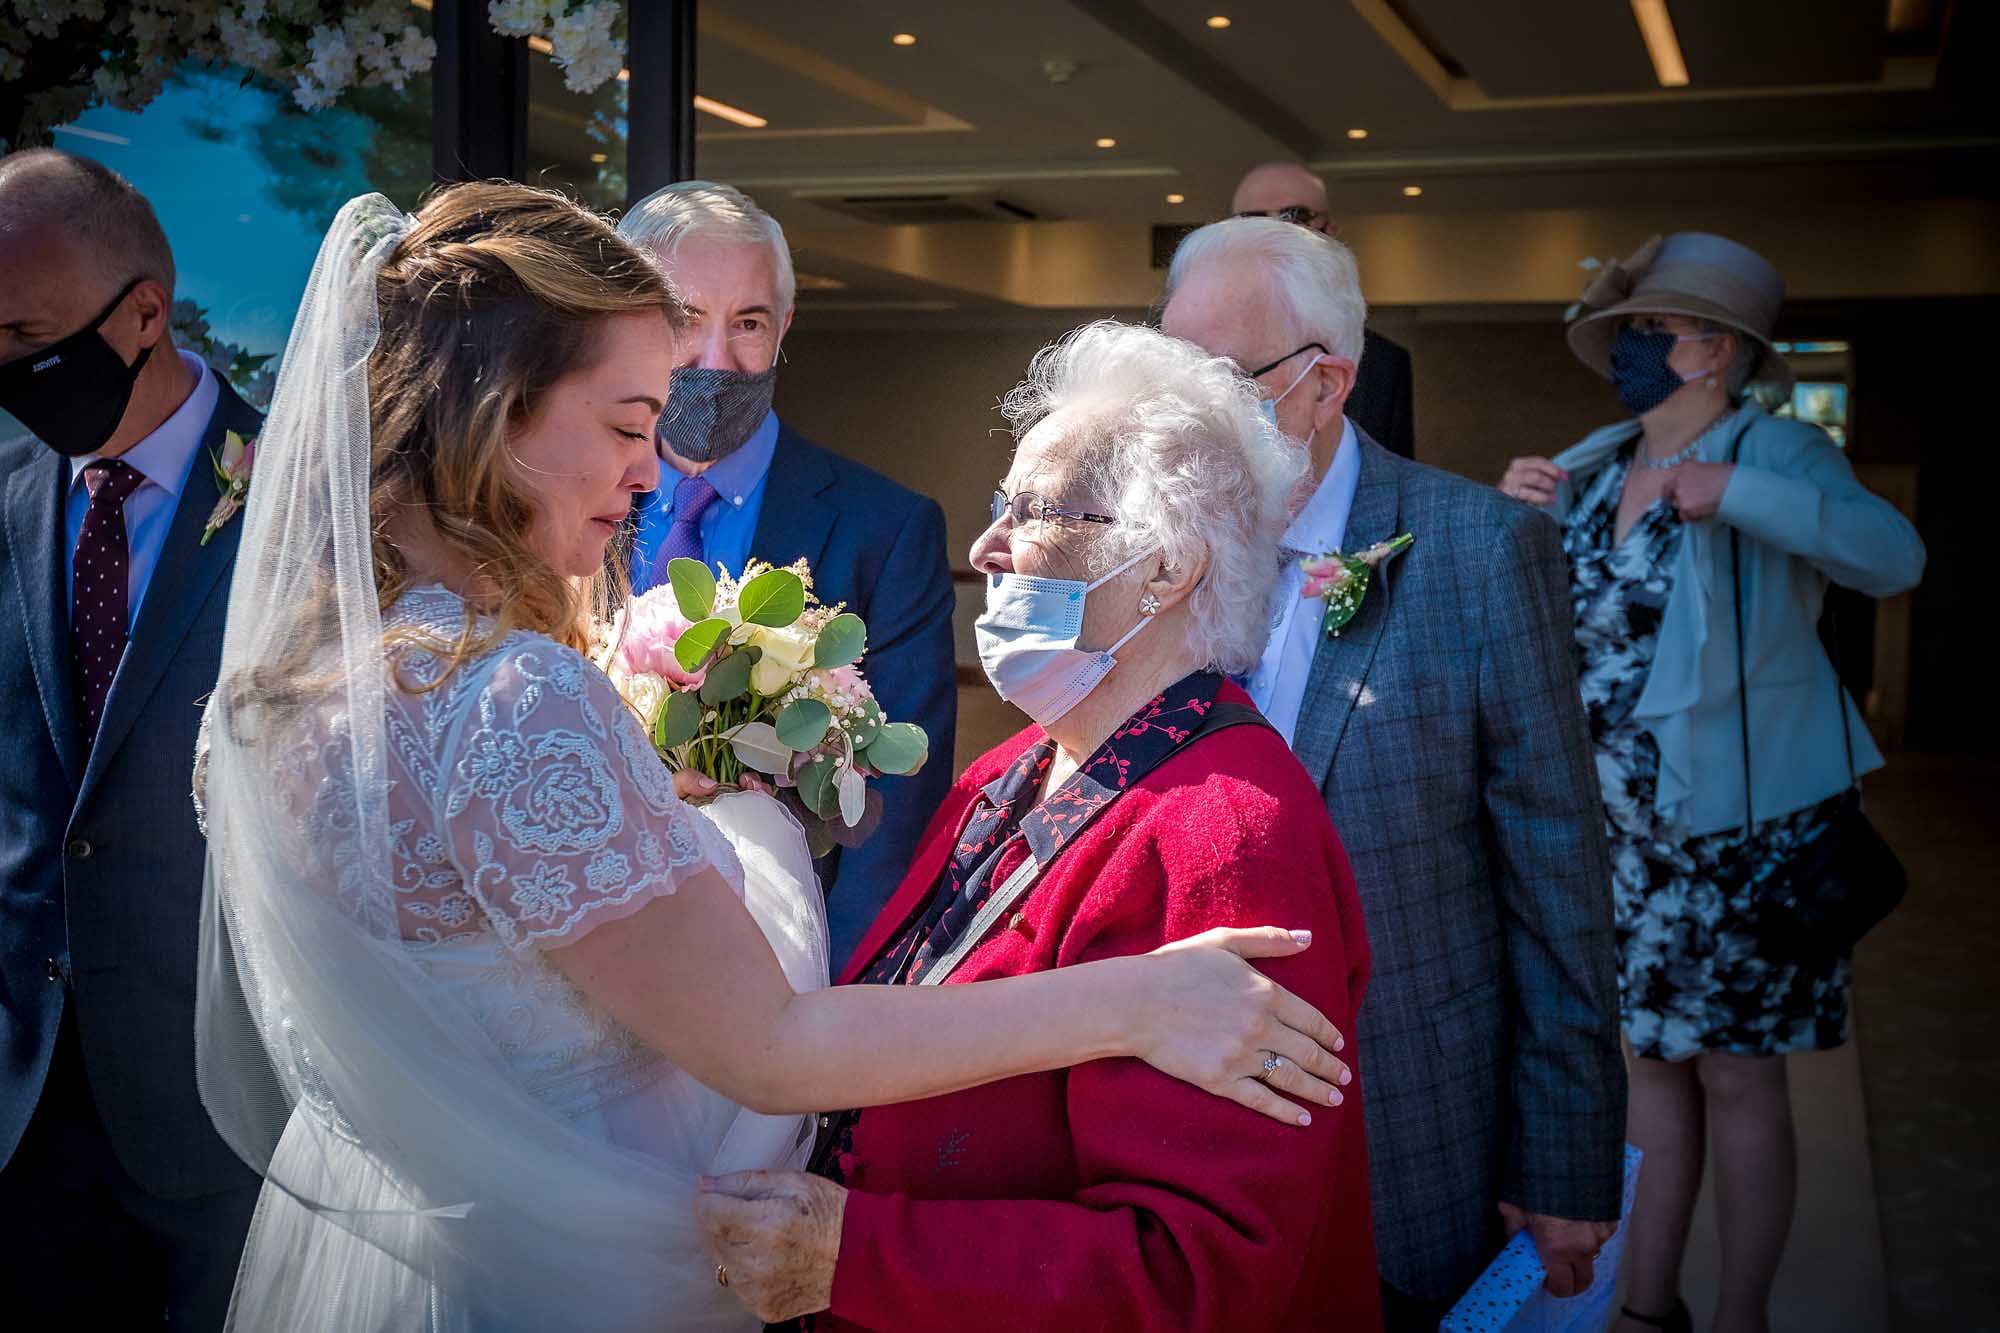 Tearful bride greets Grandma with a tender hand on her arm after wedding ceremony